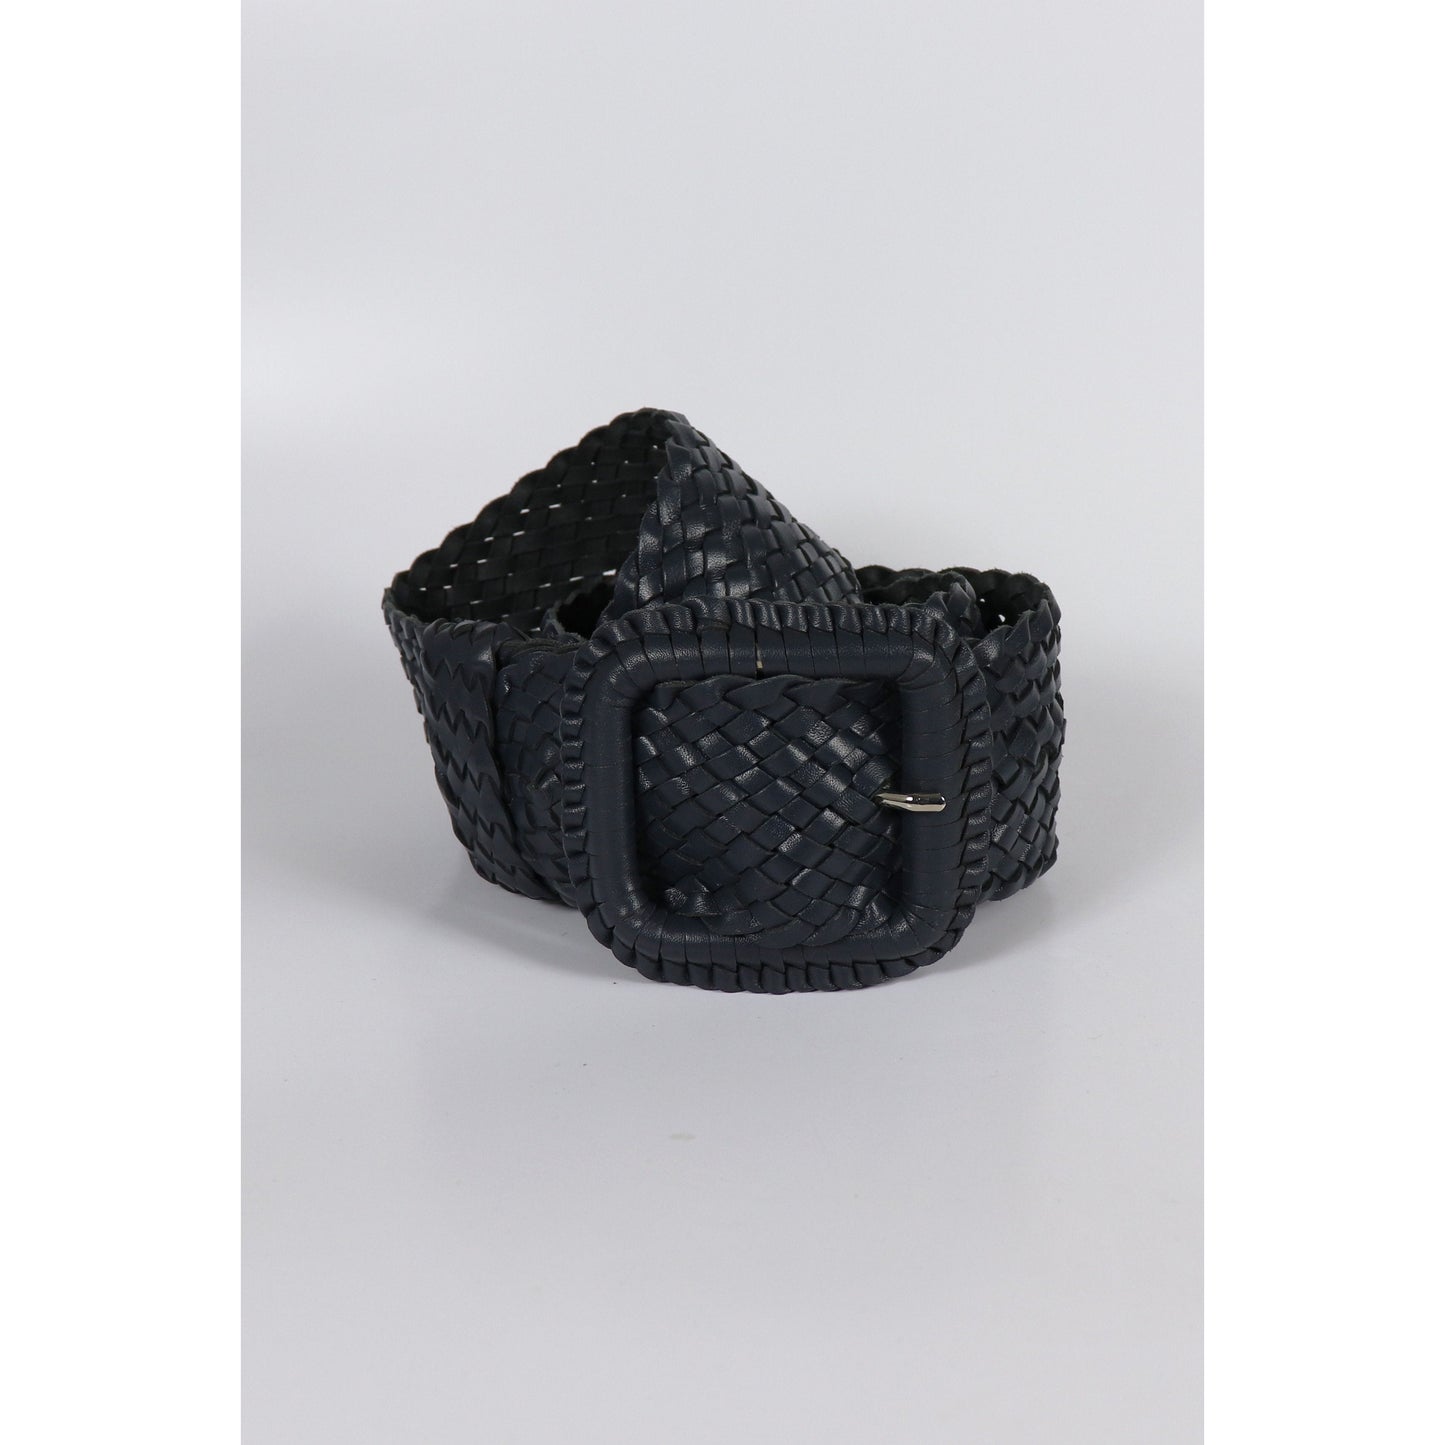 Black braided belt with buckle.